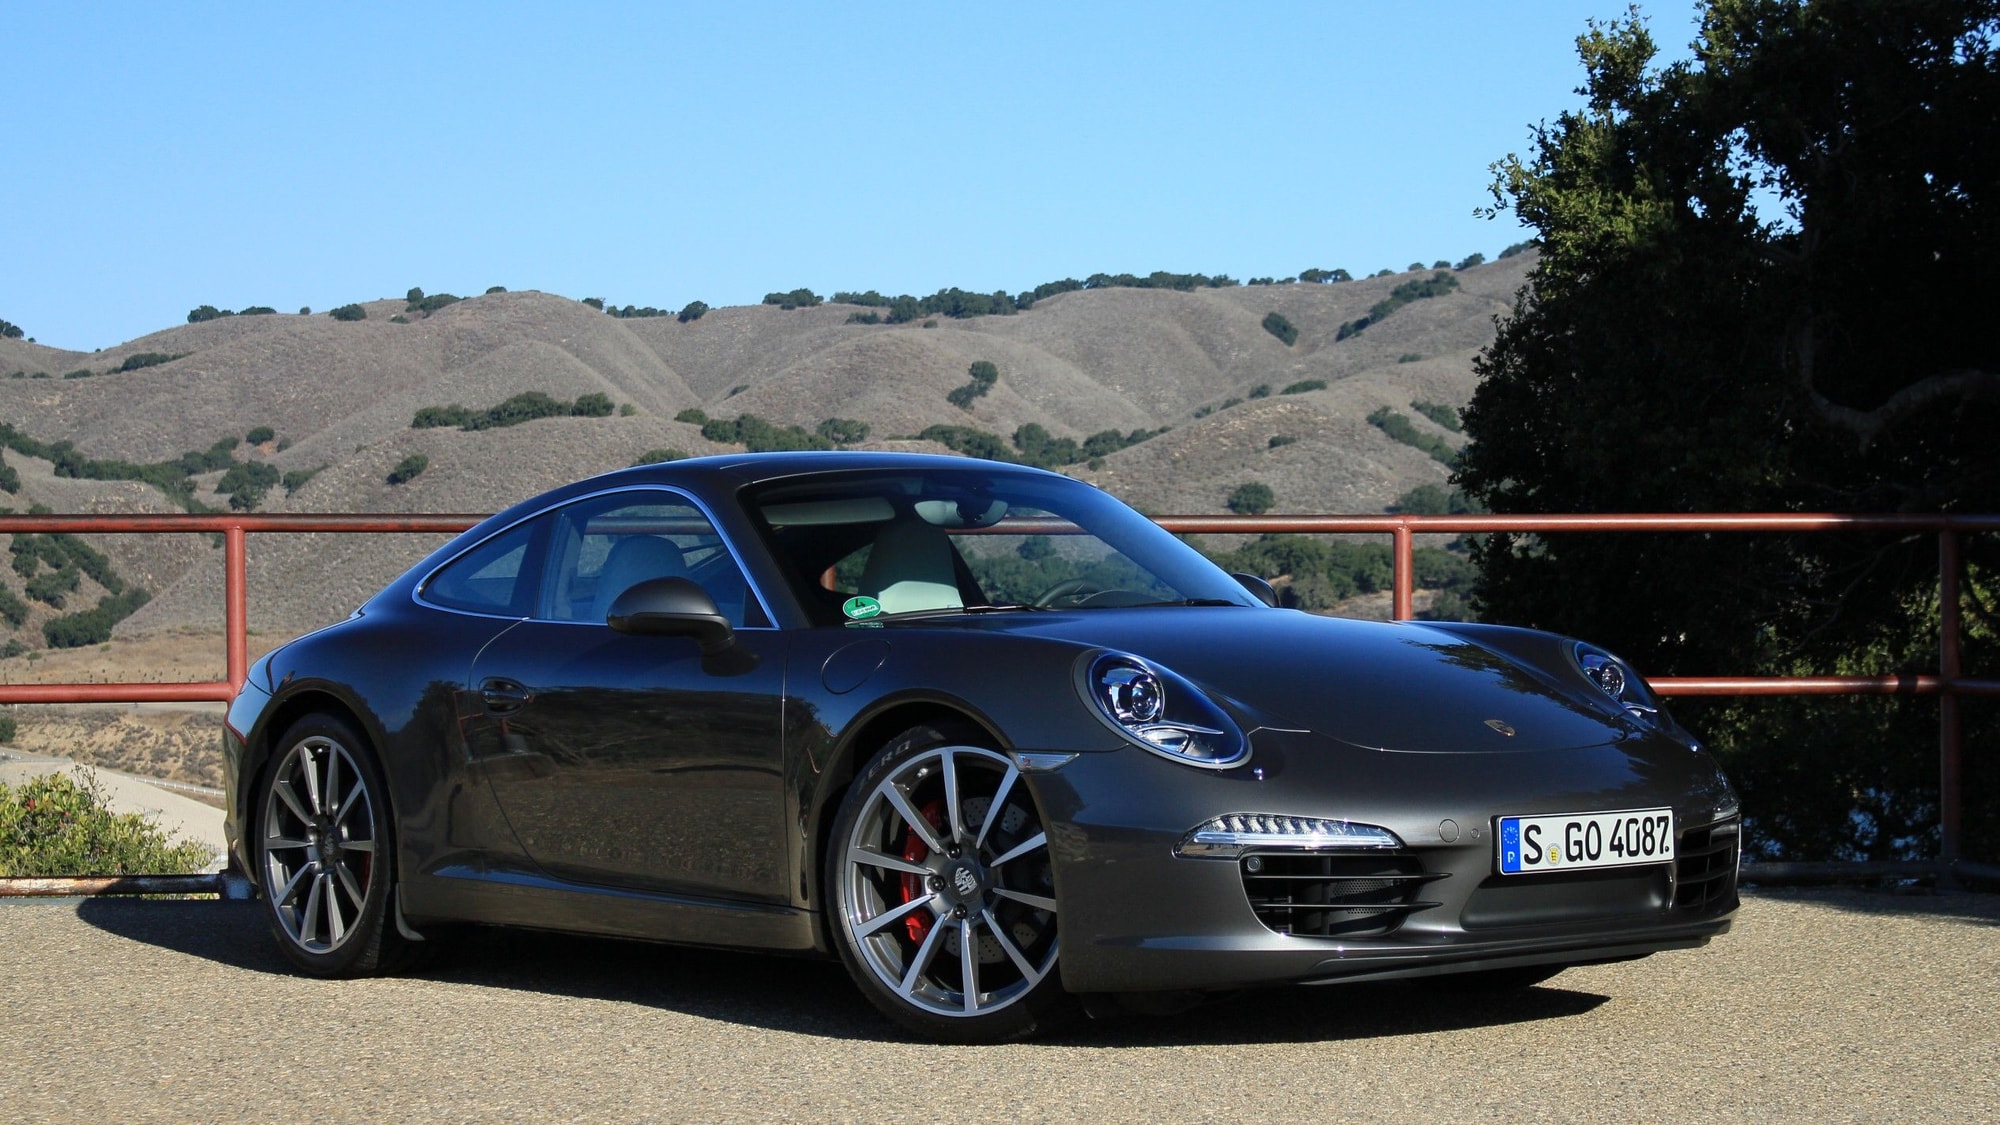 New Porsche 911 A Hit In Europe, Likely To Repeat Here